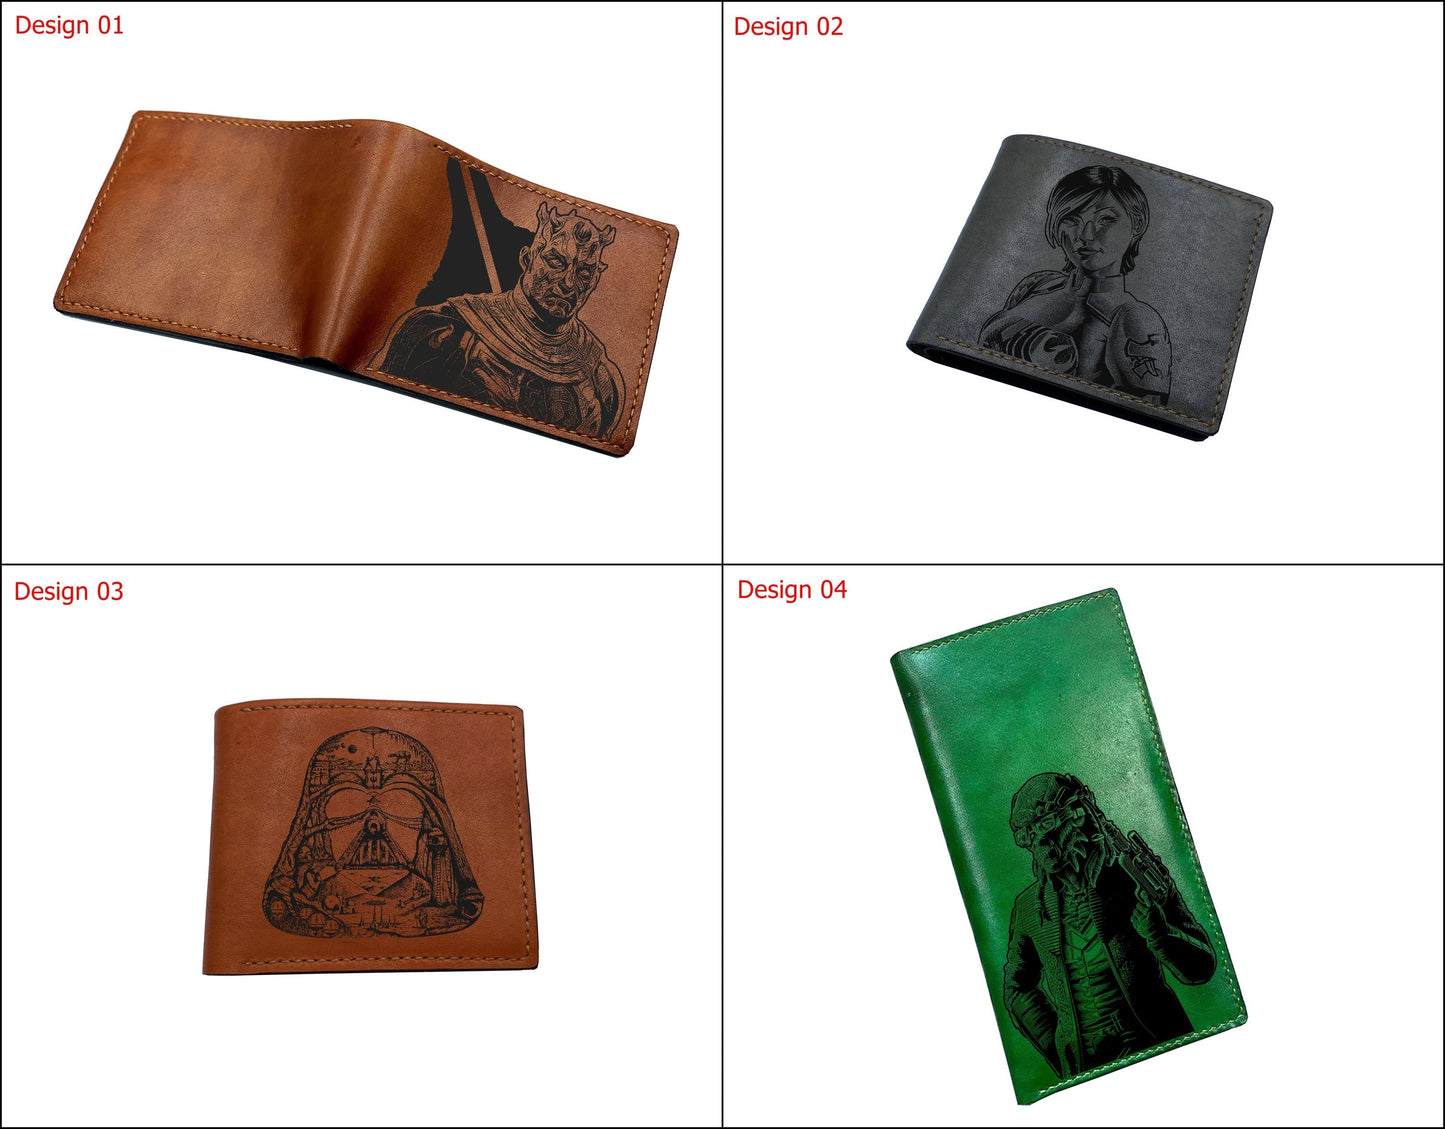 Customized leather handmade long wallet, bifold long wallet, Starwars leather wallet for brother, cool christmas gift ideas for friend